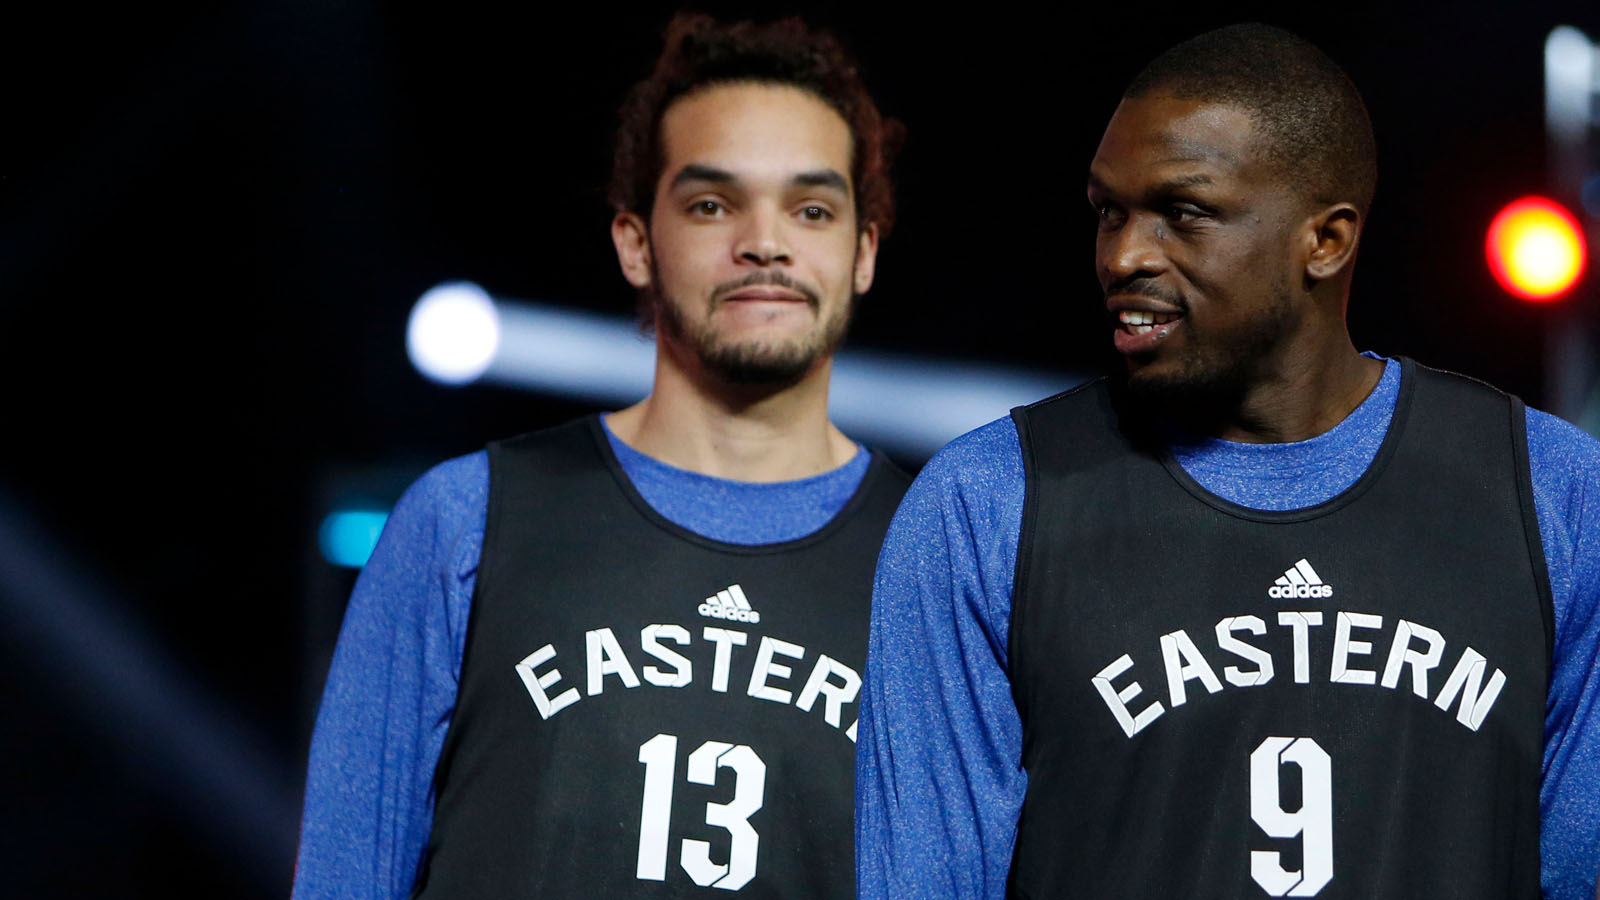 Joakim Noah wants to 'change the narrative' about African basketball